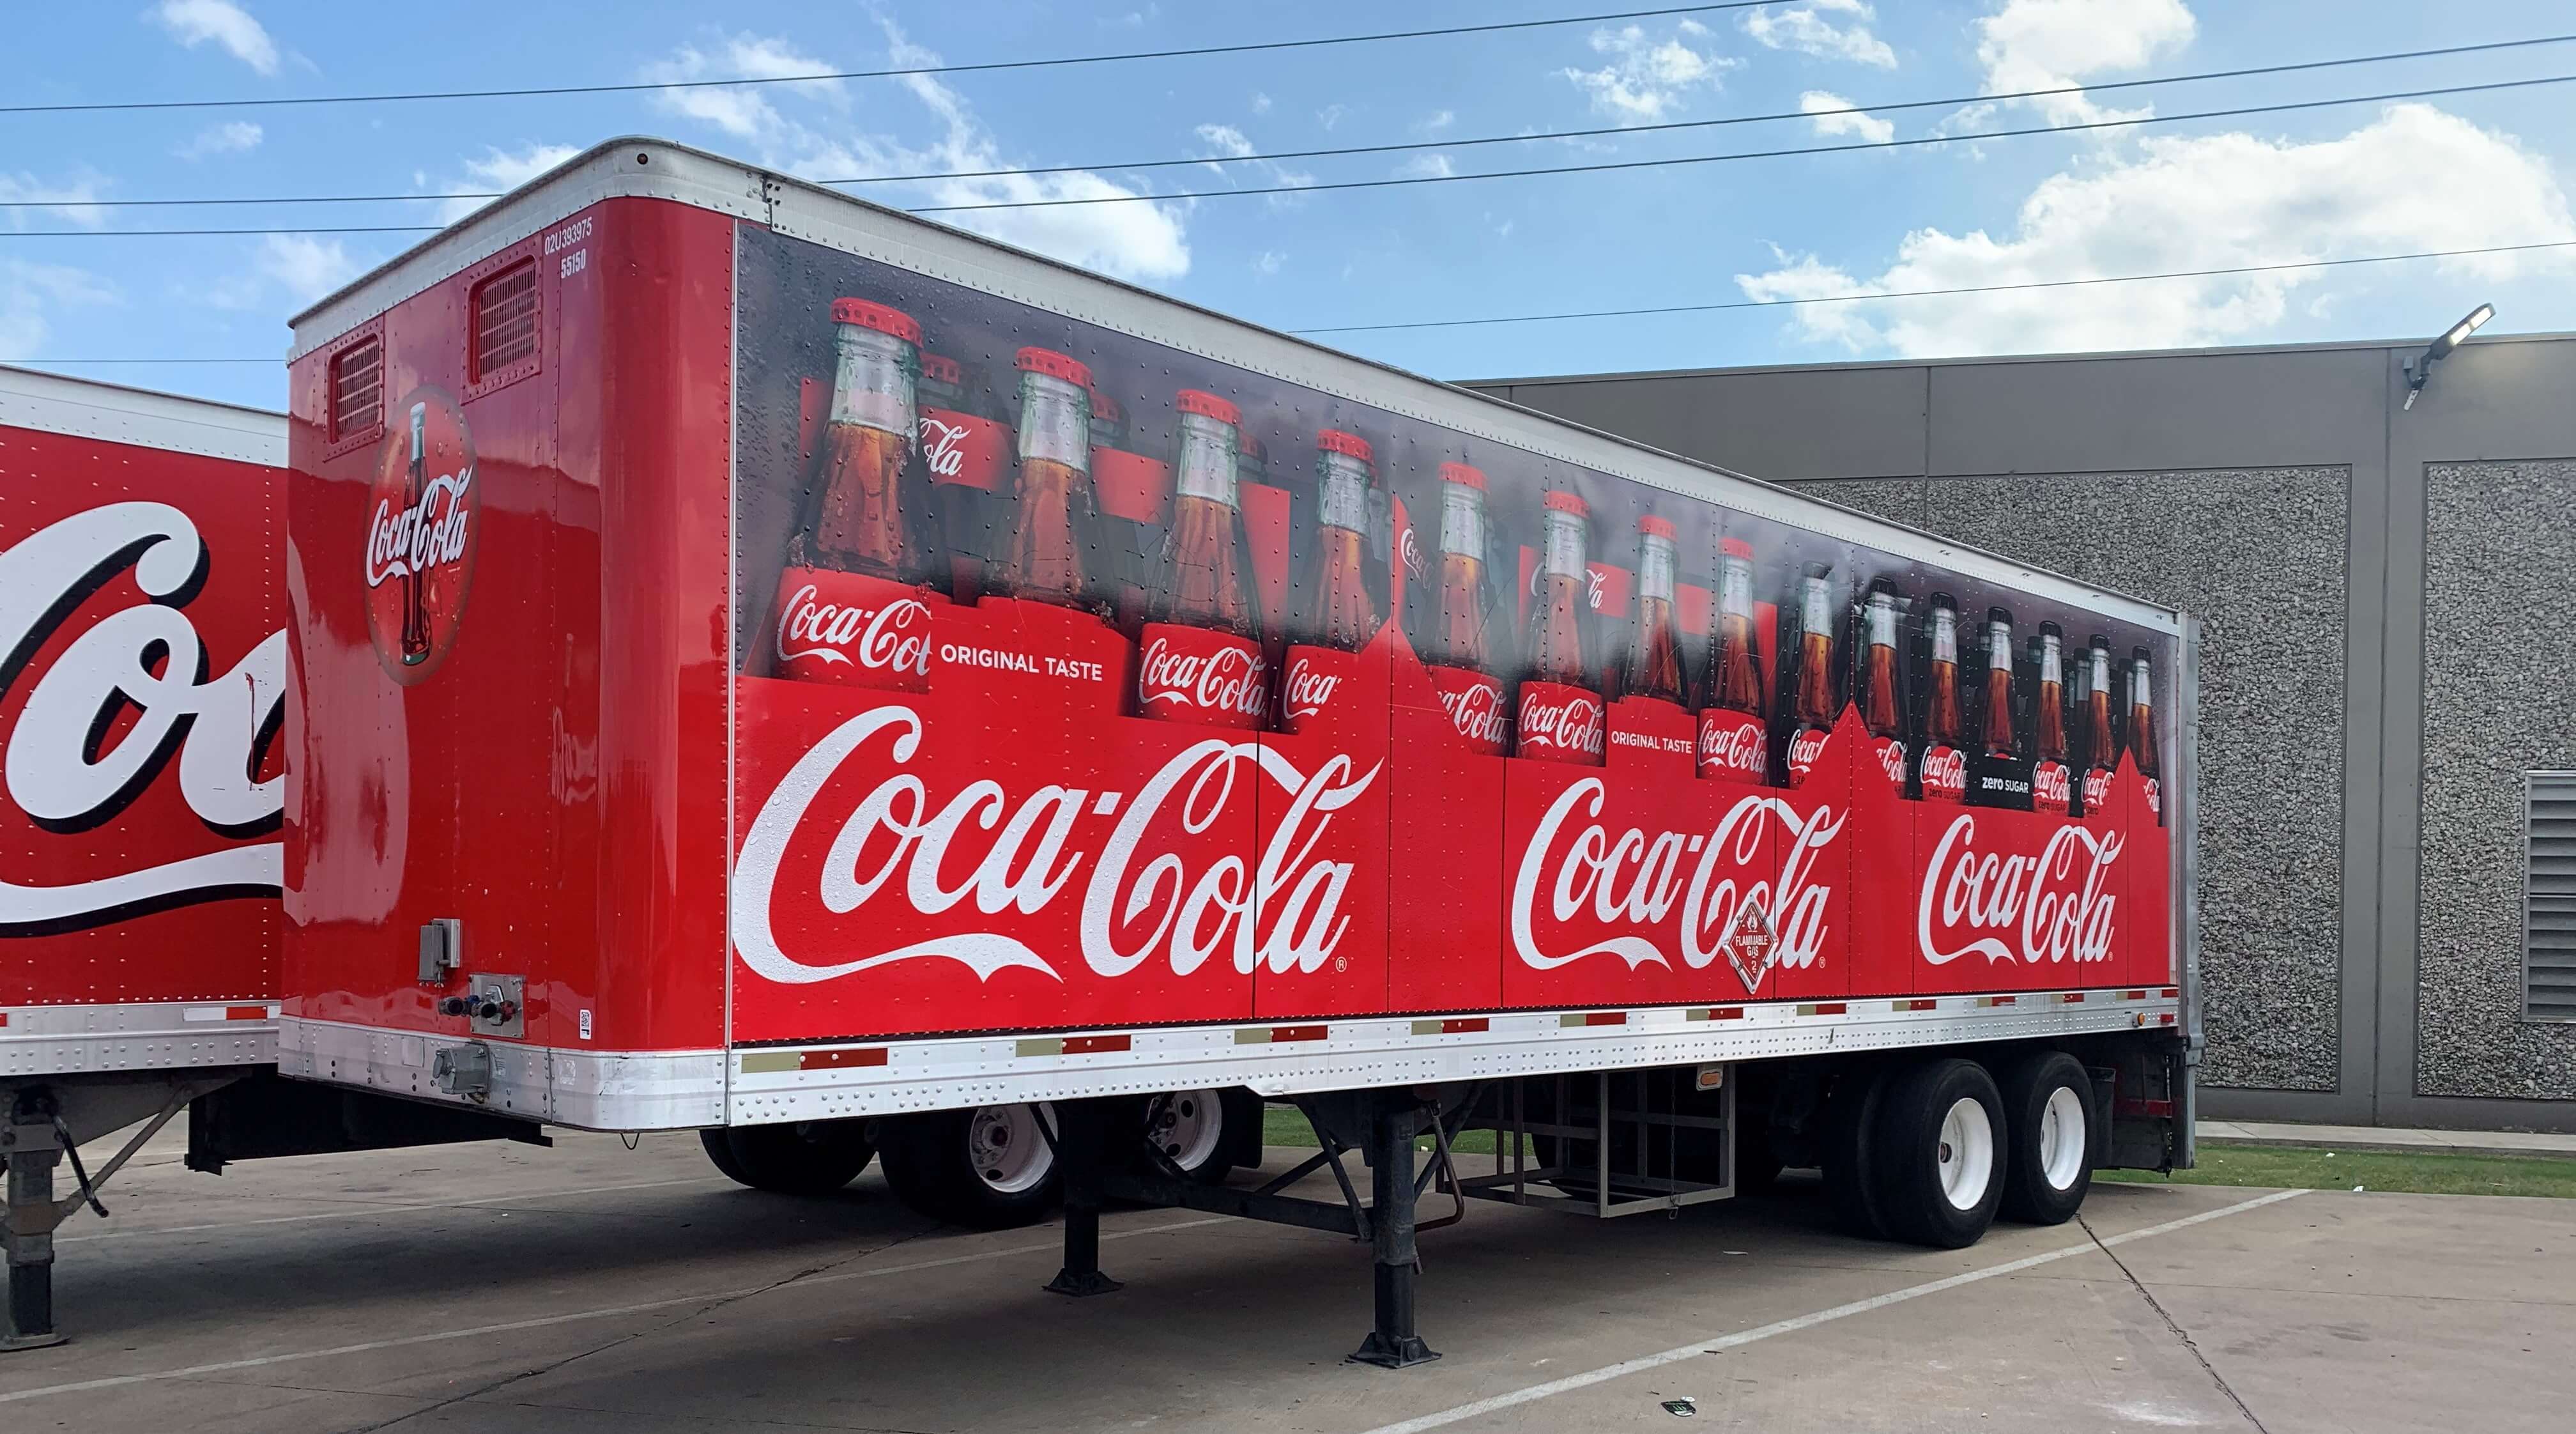 Coca-cola vehicle and trailer wrapping project by Turbo Images the leadet in trailer wrap so that your trailers adn their wraps will be mobile marketing assets. For nice graphics on your trucks and trailers, contact Turbo Images